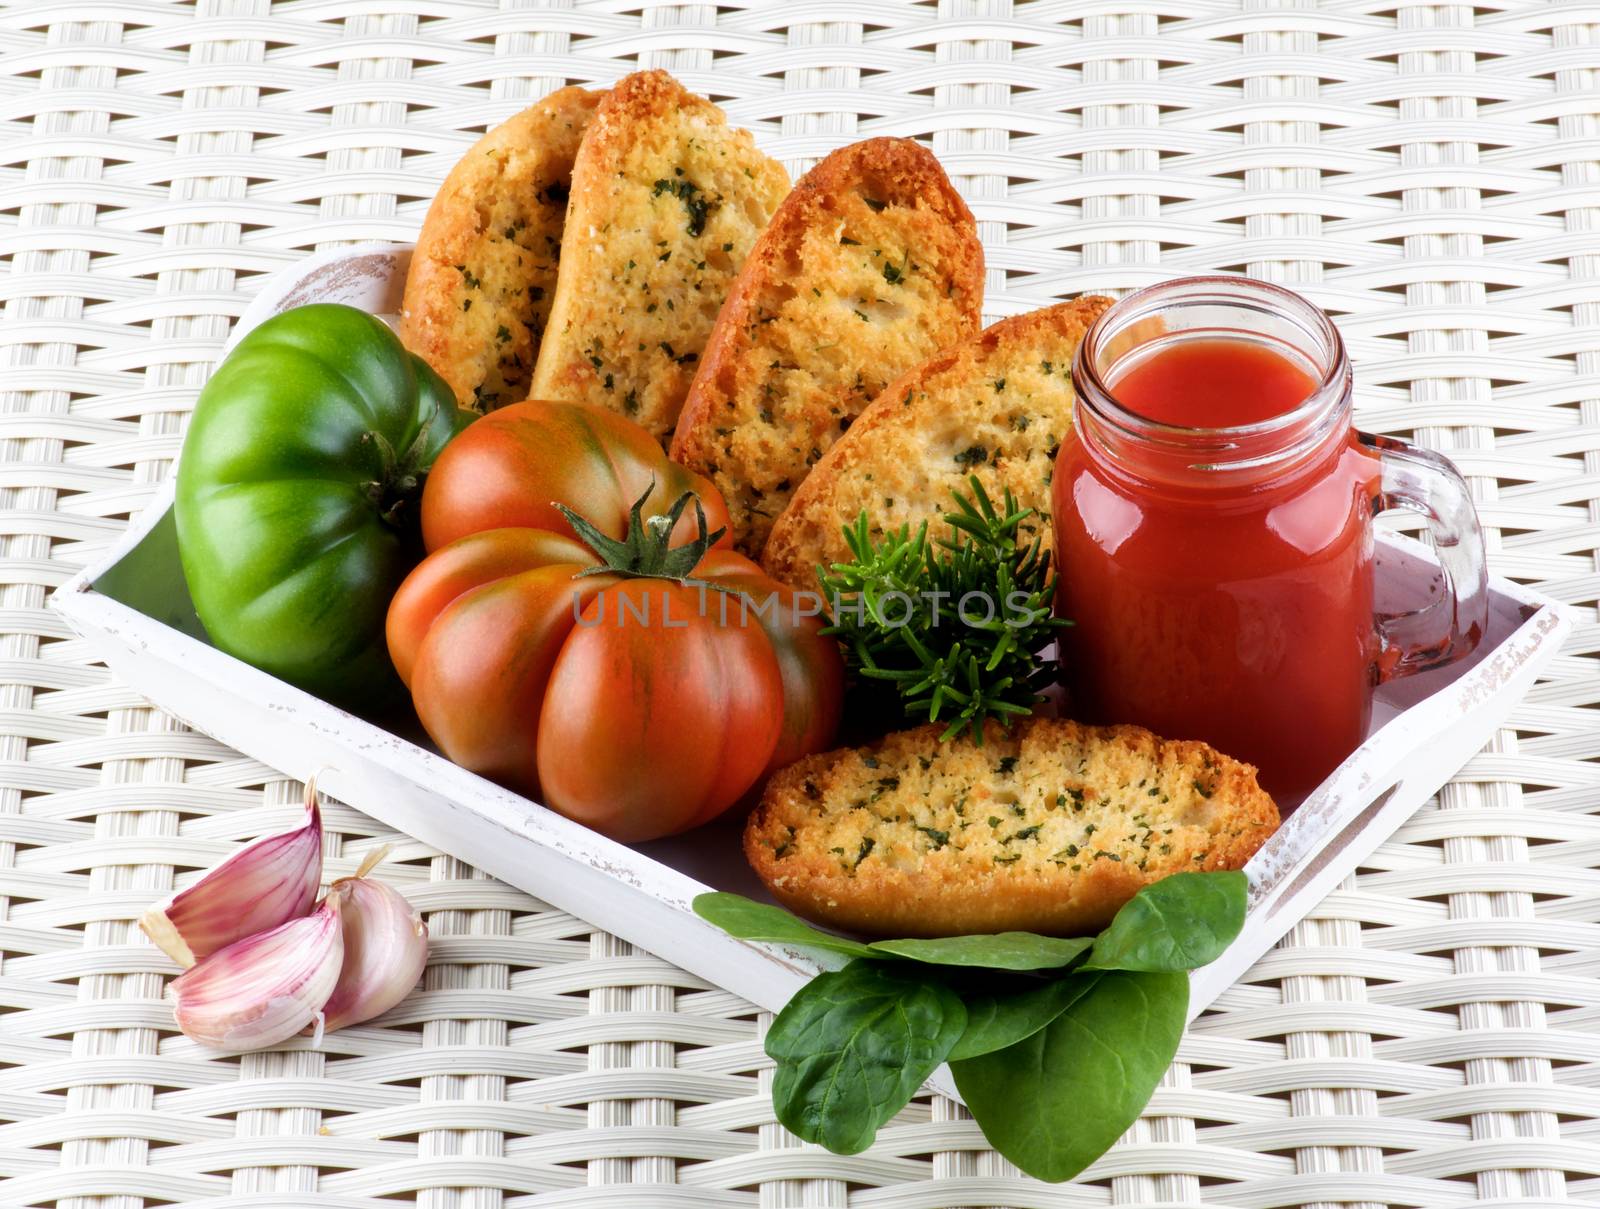 Arrangement of Tomato Juice in Glass Jar with Raw Tomatoes, Crispy Bread and Fresh Herbs into White Wooden Tray closeup on Wicker background